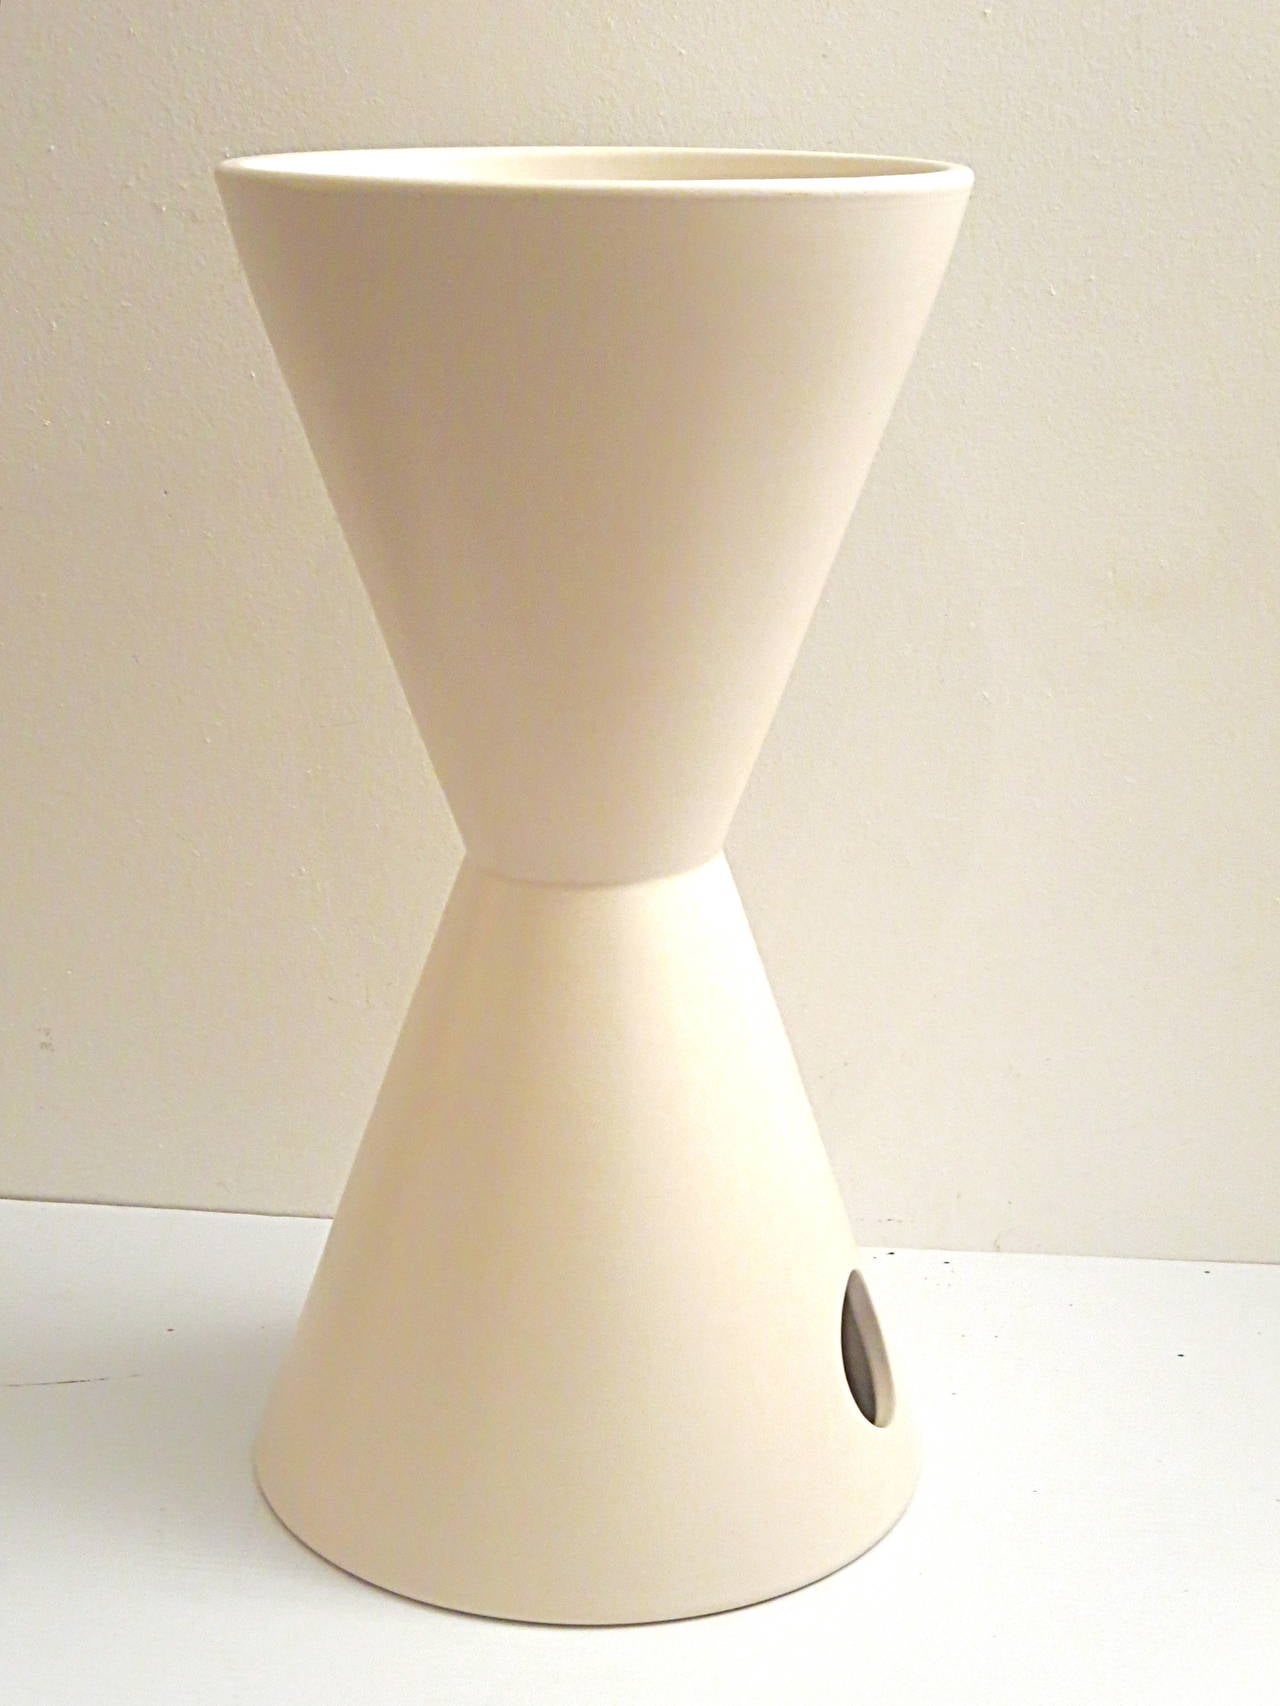 Simple lines on this tall  hour glass shape planter designed by Lagardo Tackett for Architectural Pottery Vessel model TH-2 in a cream white mate color finish great condition , no chips or cracks.